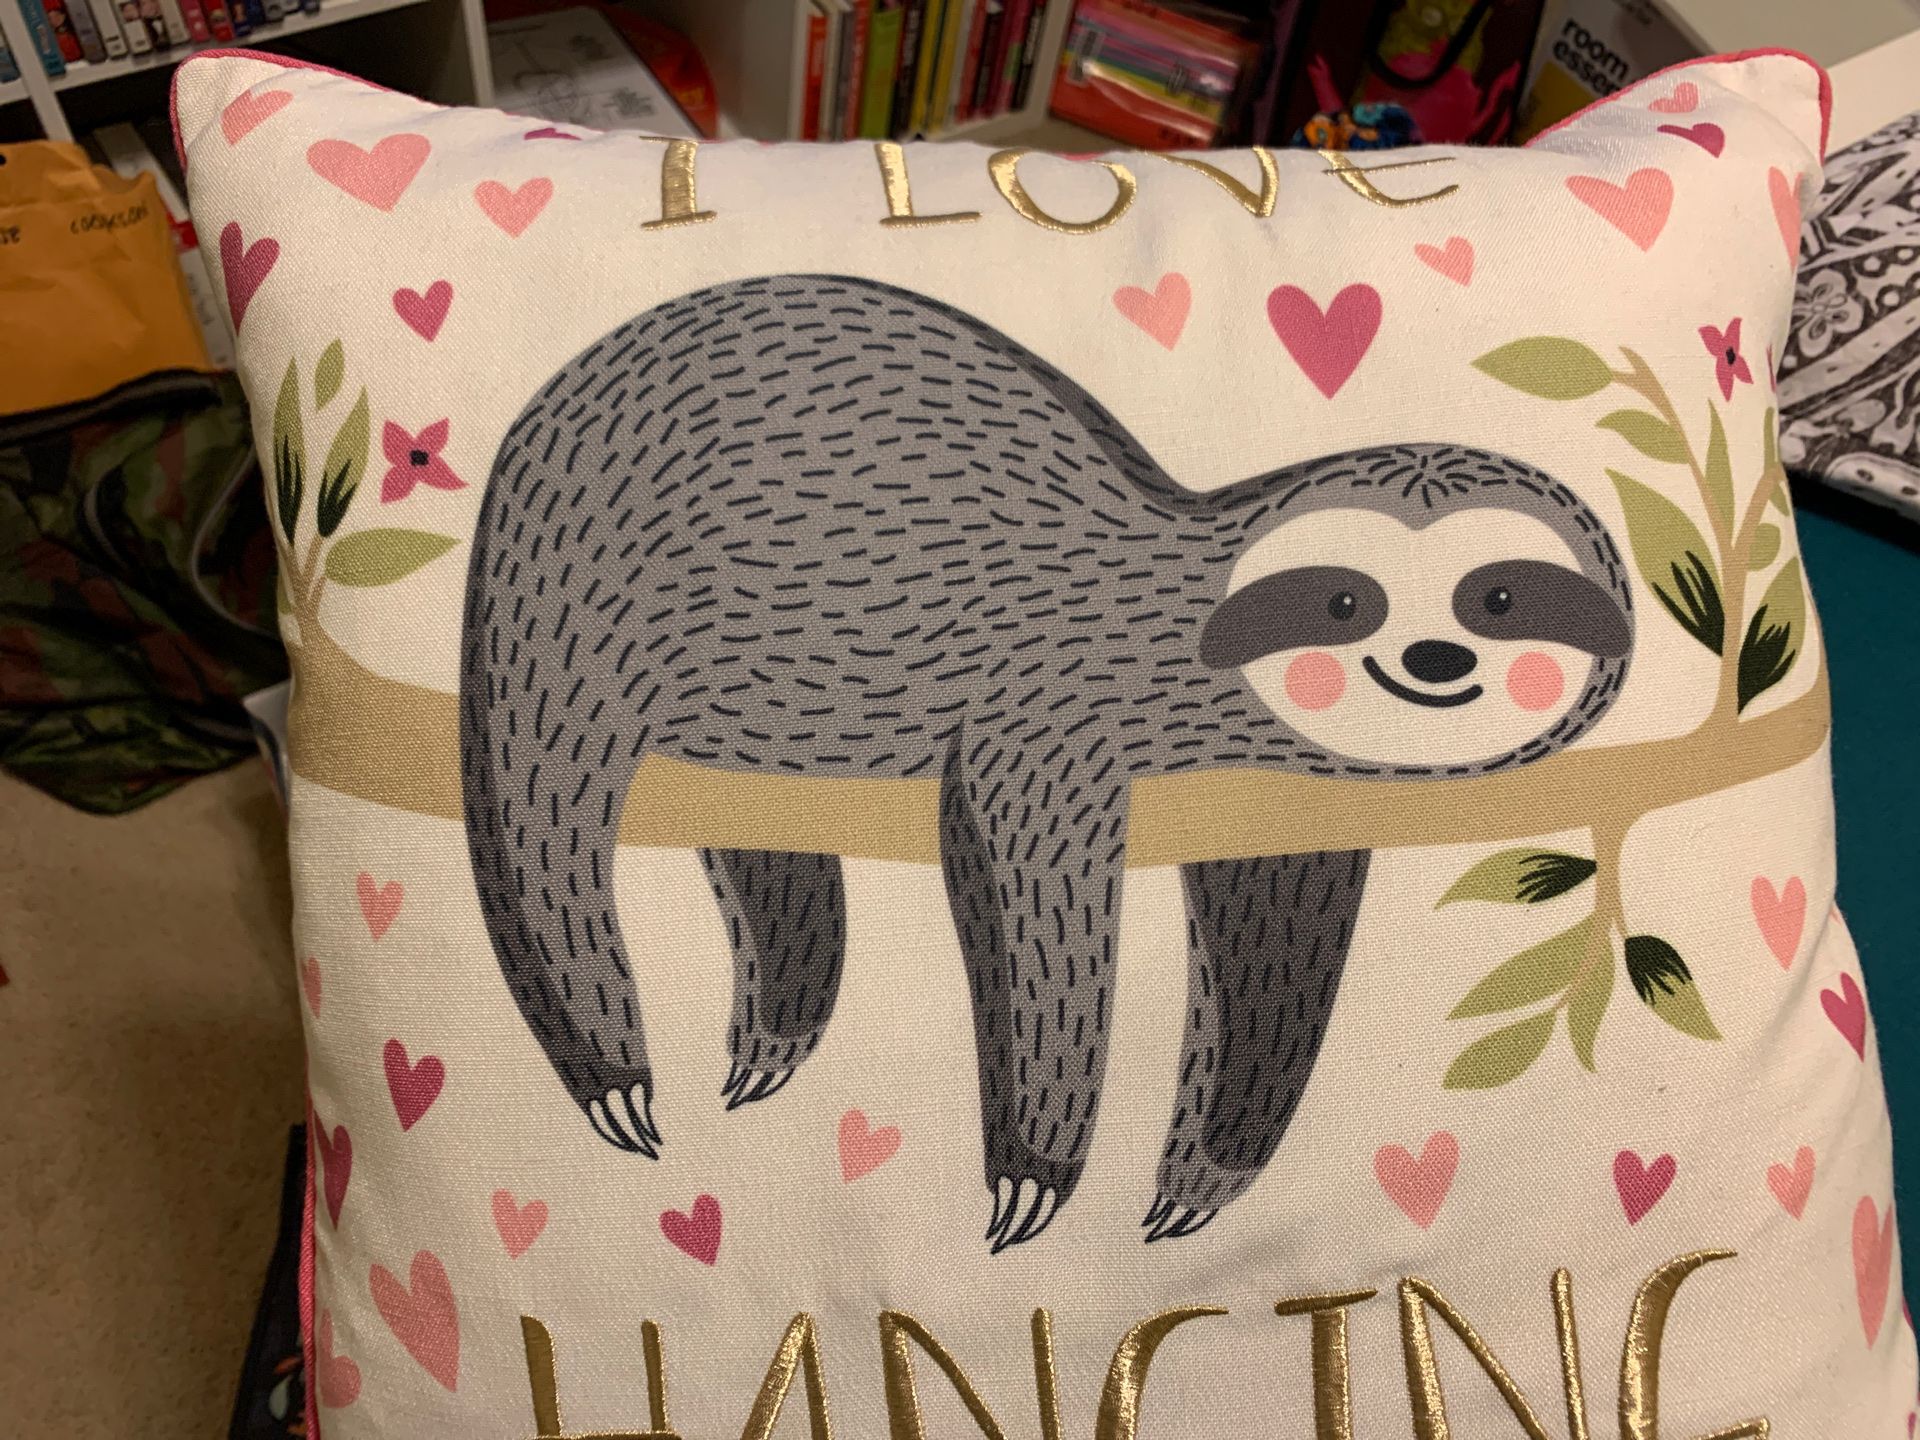 “I love hanging with you” Sloth pillow